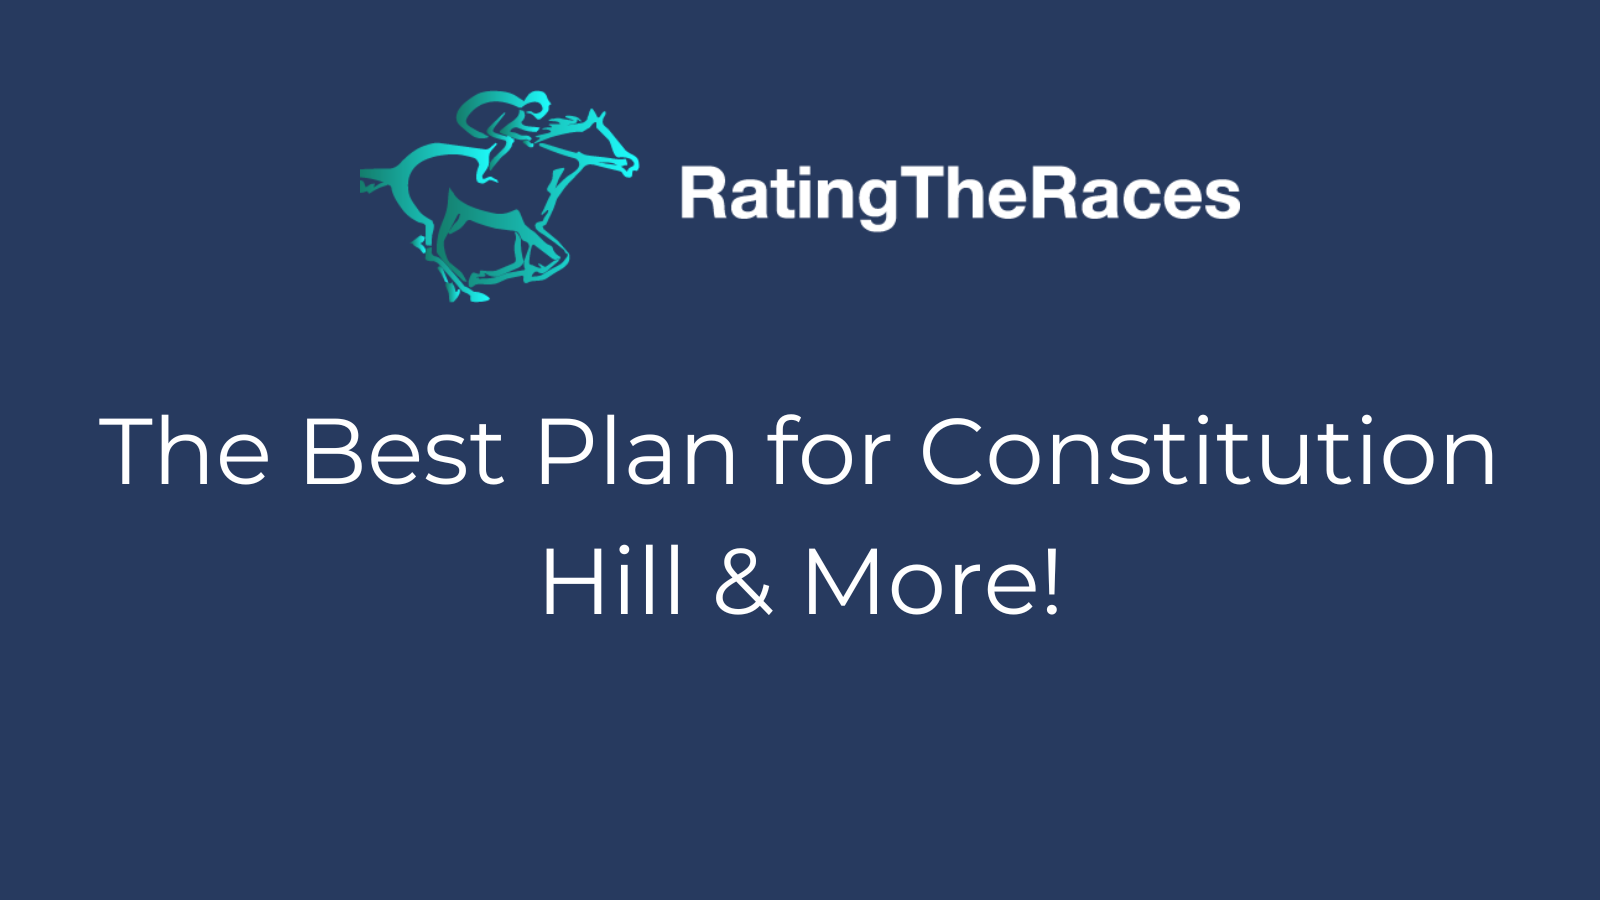 The best plan for Constitution Hill